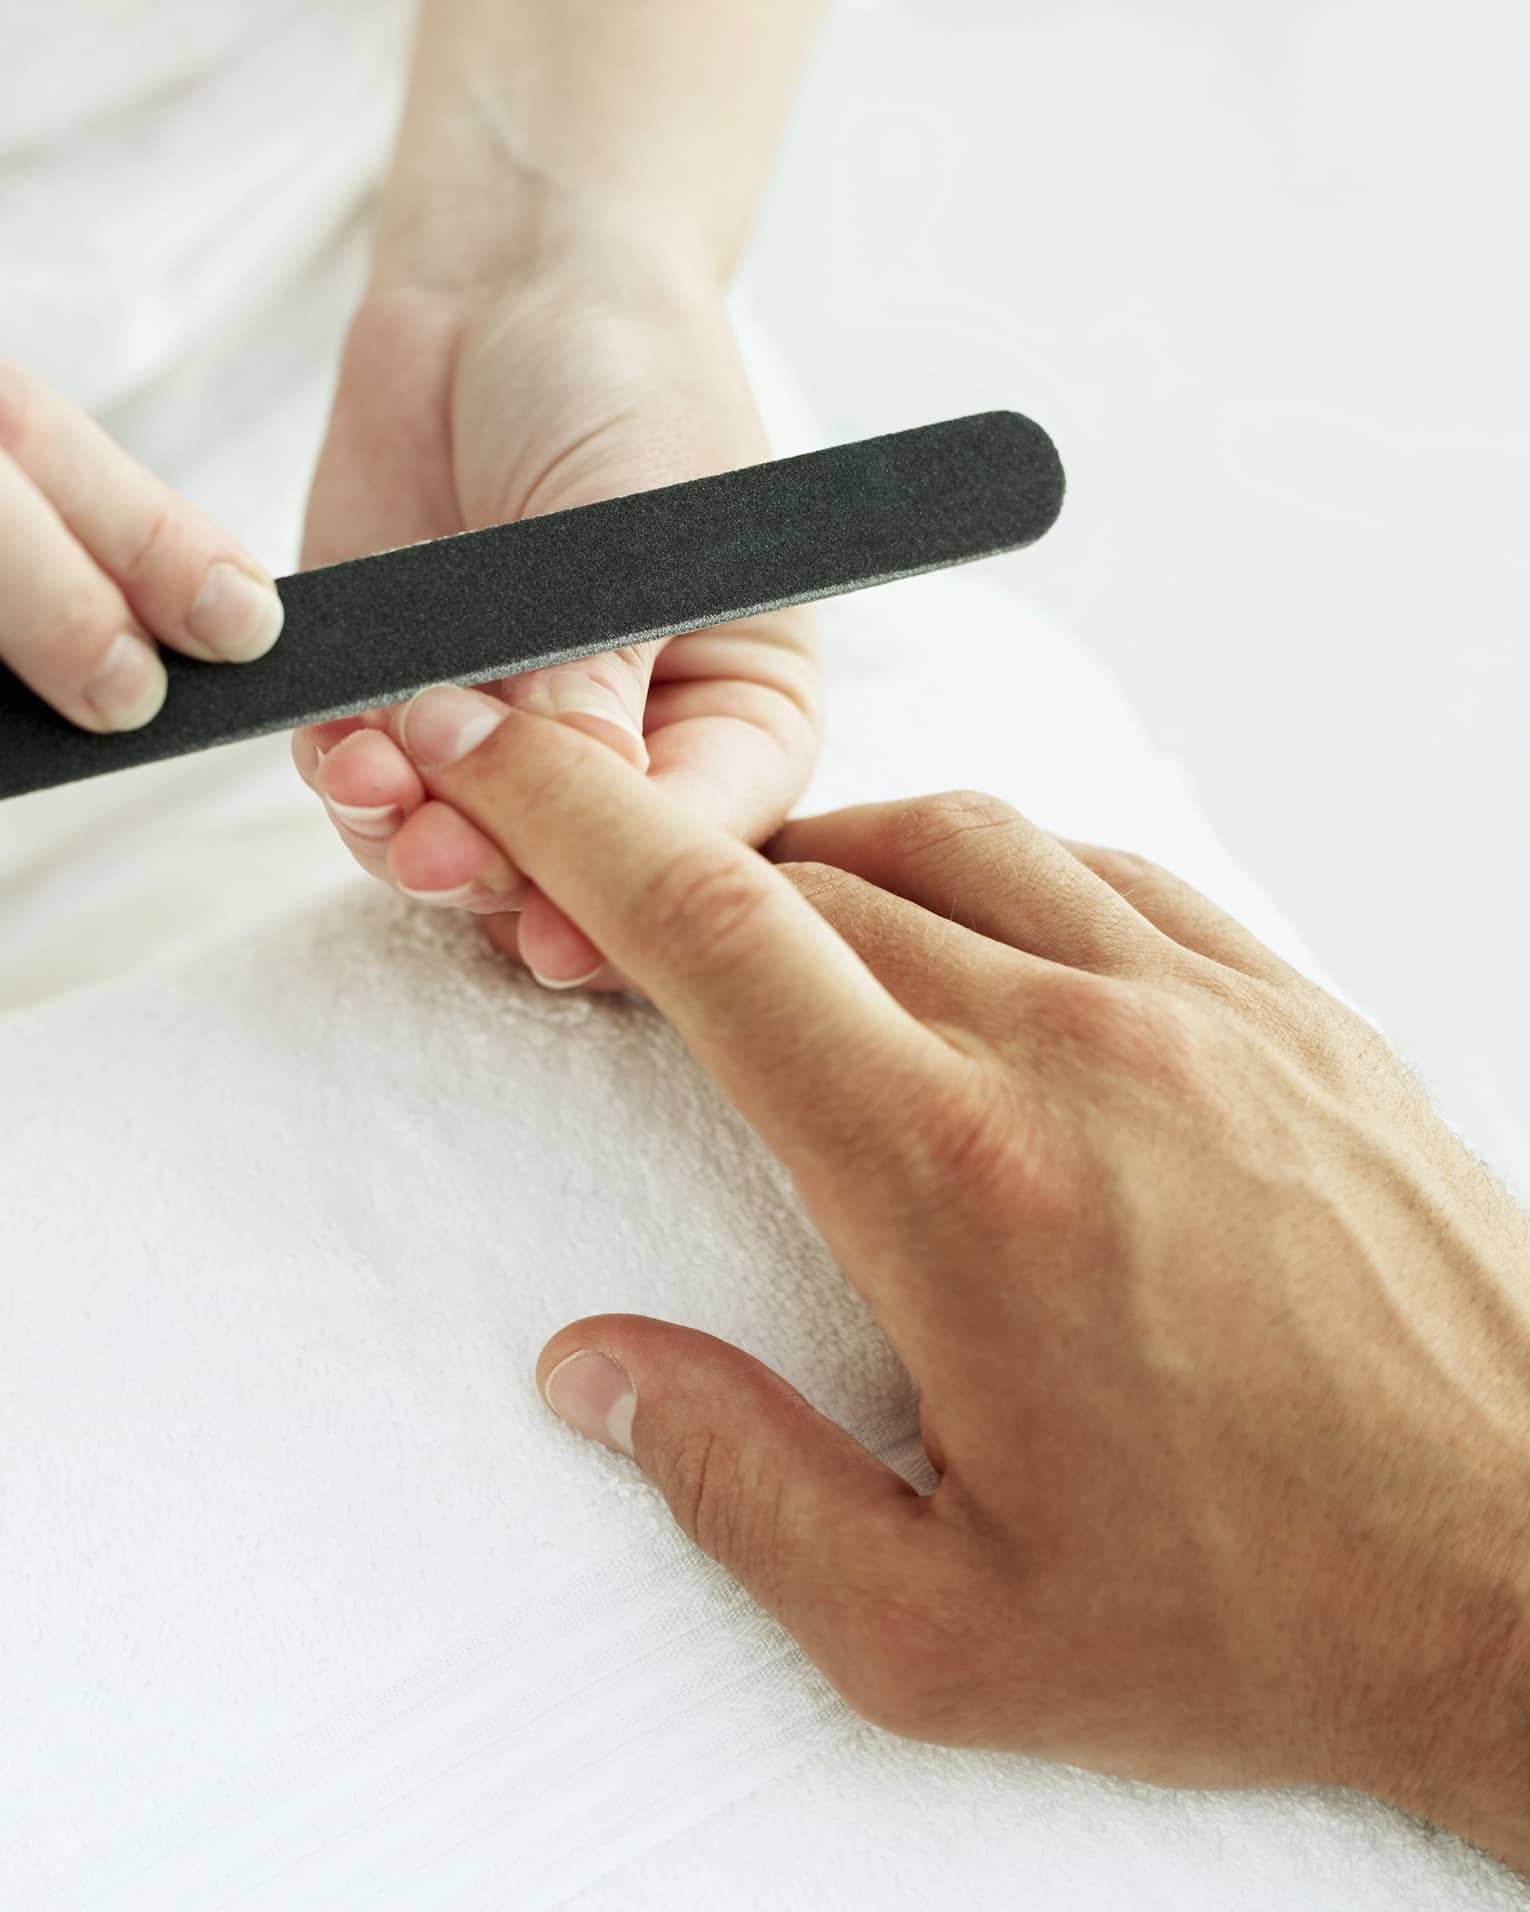 Woman holds manicure nail file to man's fingernails over white towel